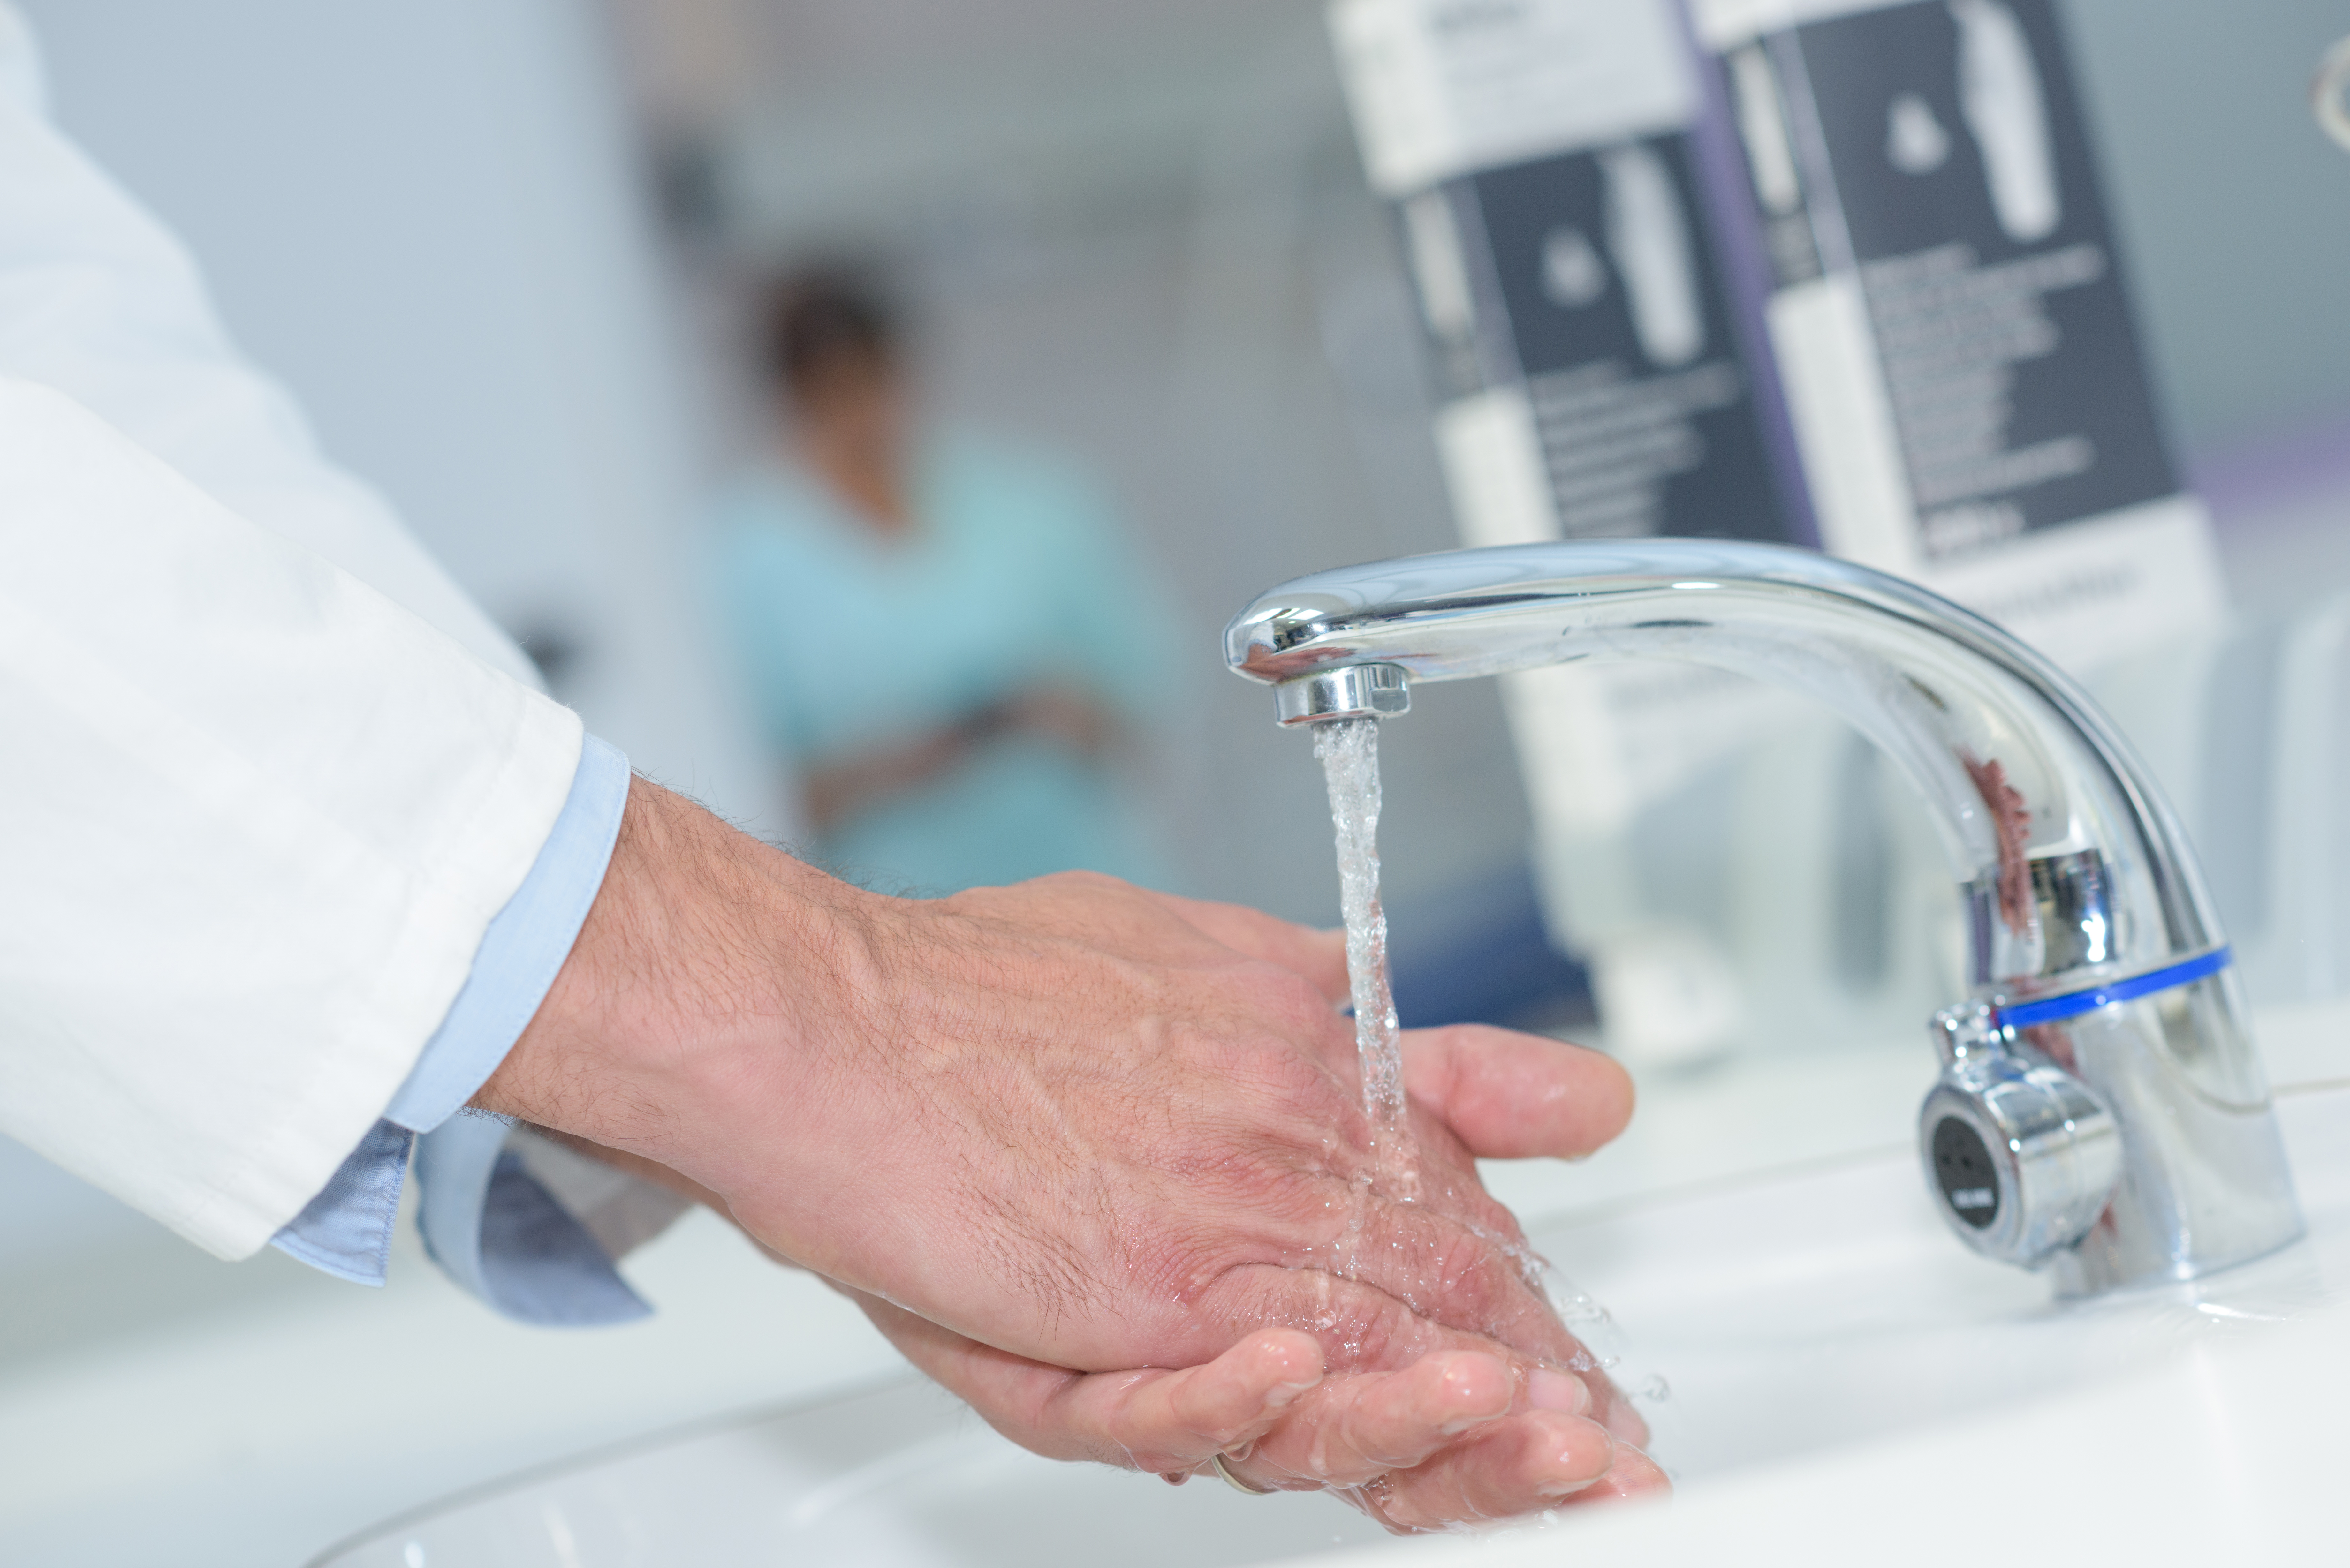 Stop Hoarding Hand Sanitizer: Why Hand-Washing is Superior